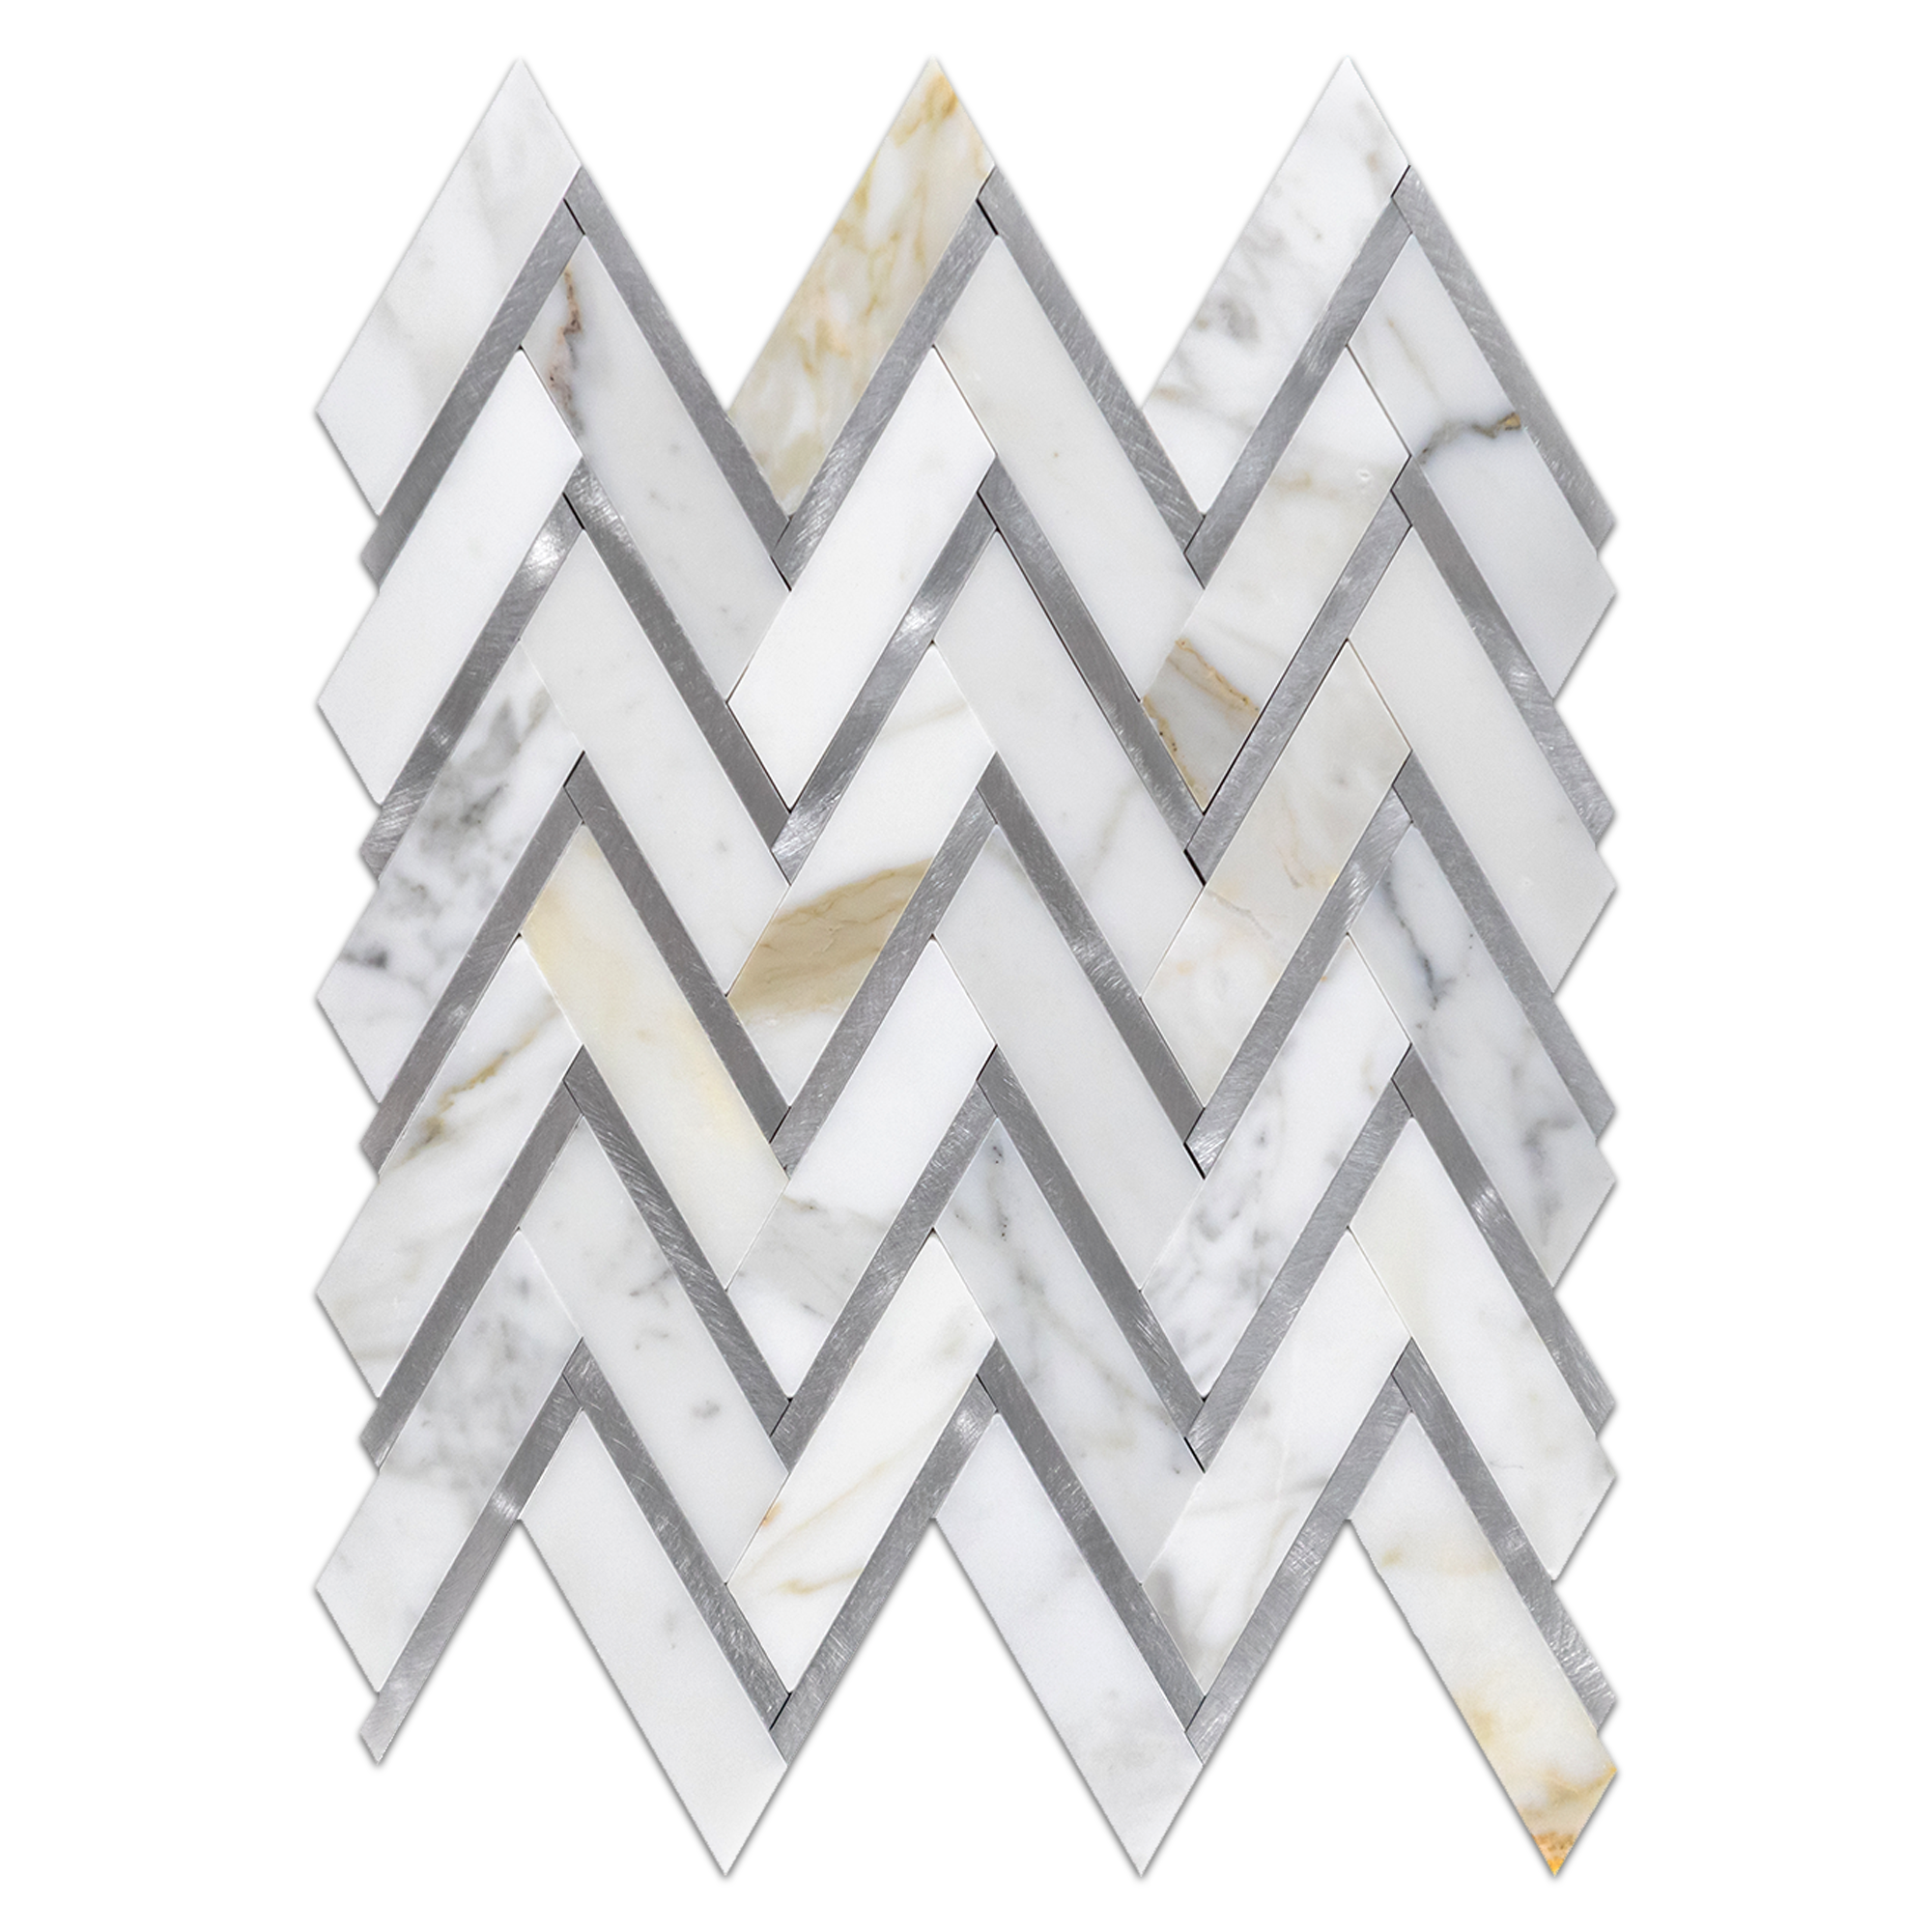 Alt text: "Elon Calacatta Gold and Silver Aluminum Marble Herringbone Mosaic Tile, 11x13 inch, Polished Finish, available at Surface Group International."